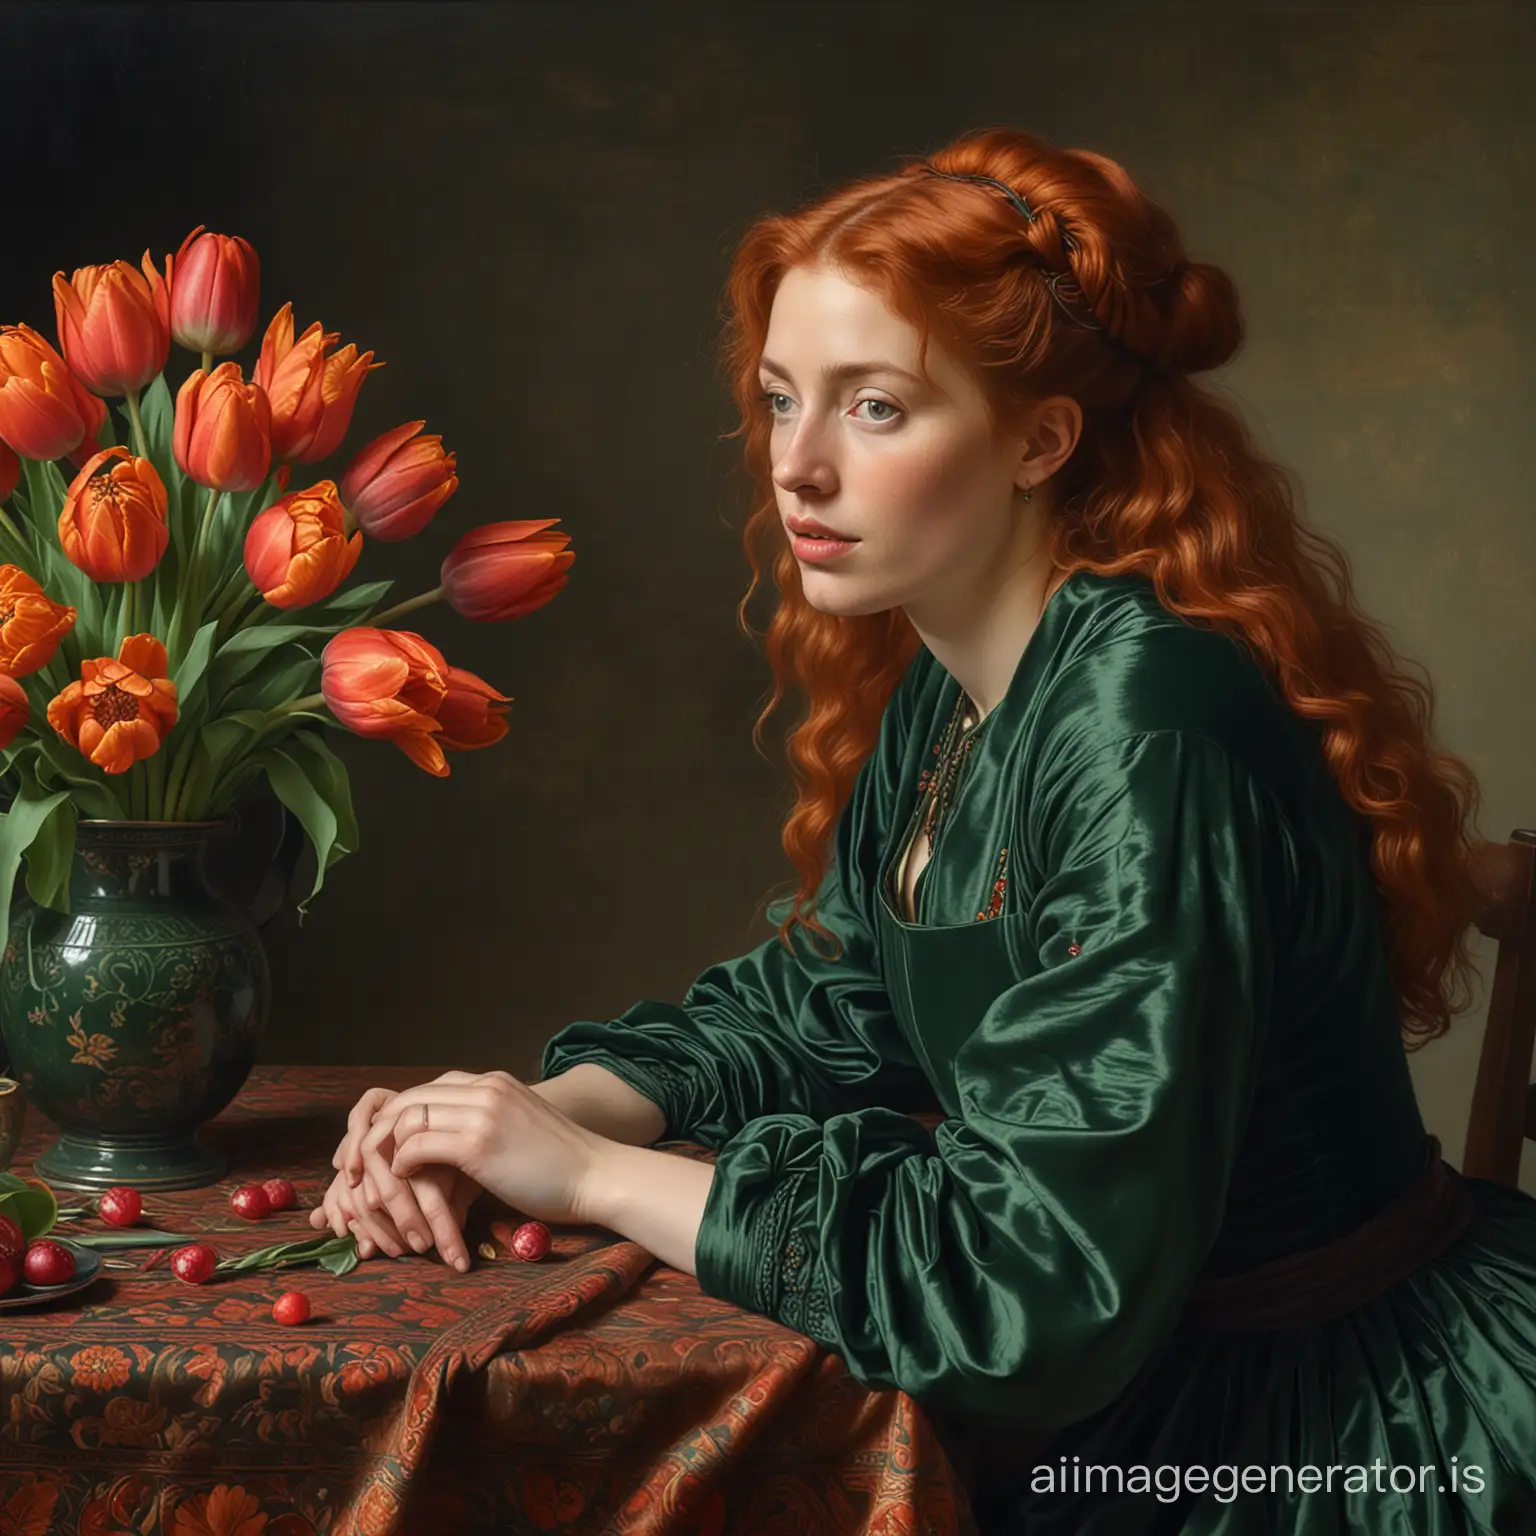 PreRaphaelite-Painting-Portrait-of-a-RedHaired-Woman-with-Tulips